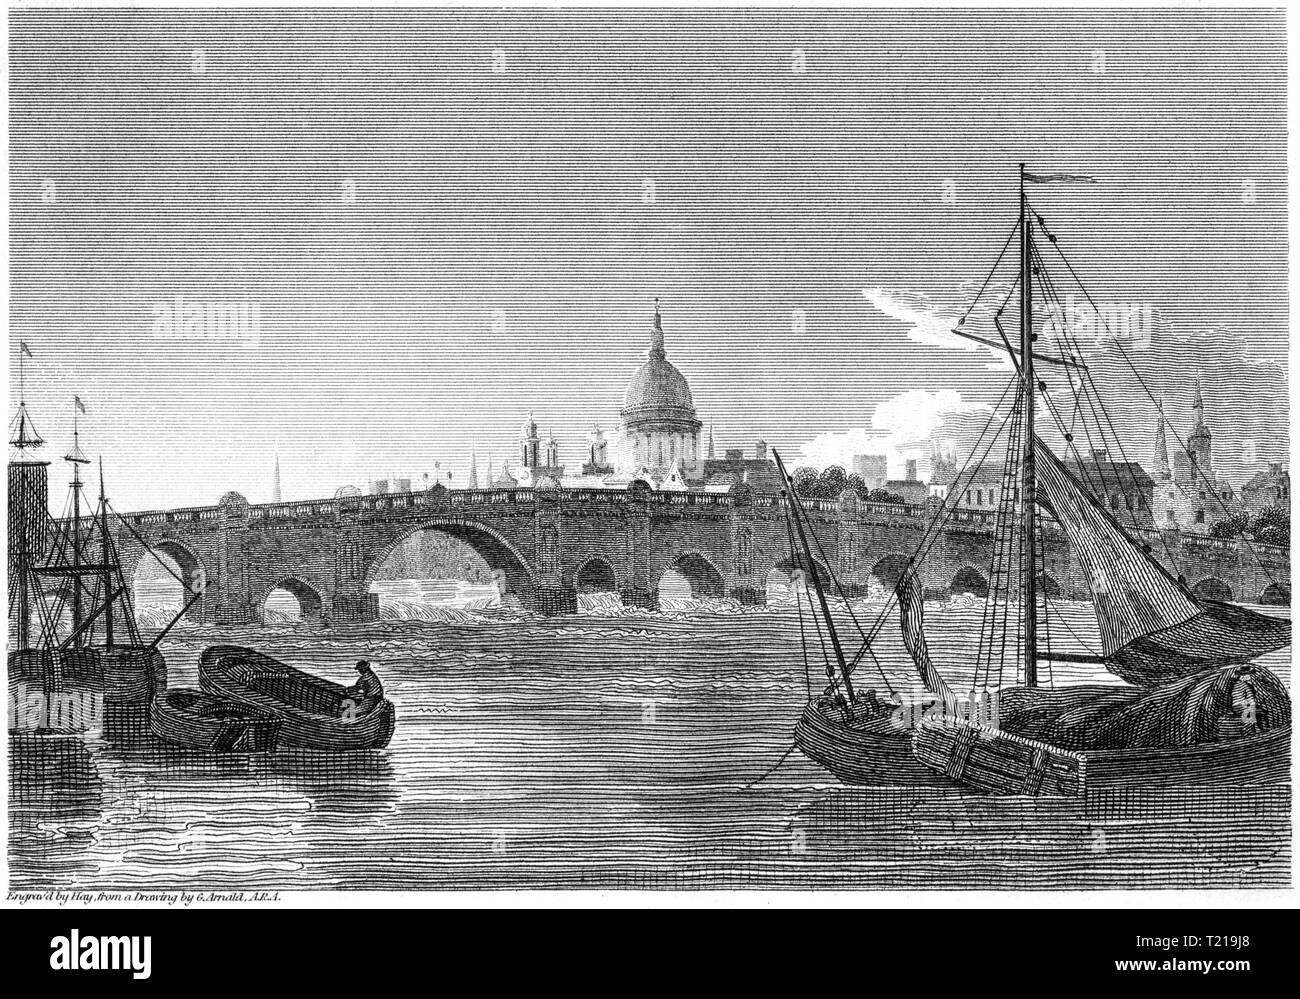 An engraving of London Bridge, London UK scanned at high resolution from a book published in 1814. Believed copyright free. Stock Photo